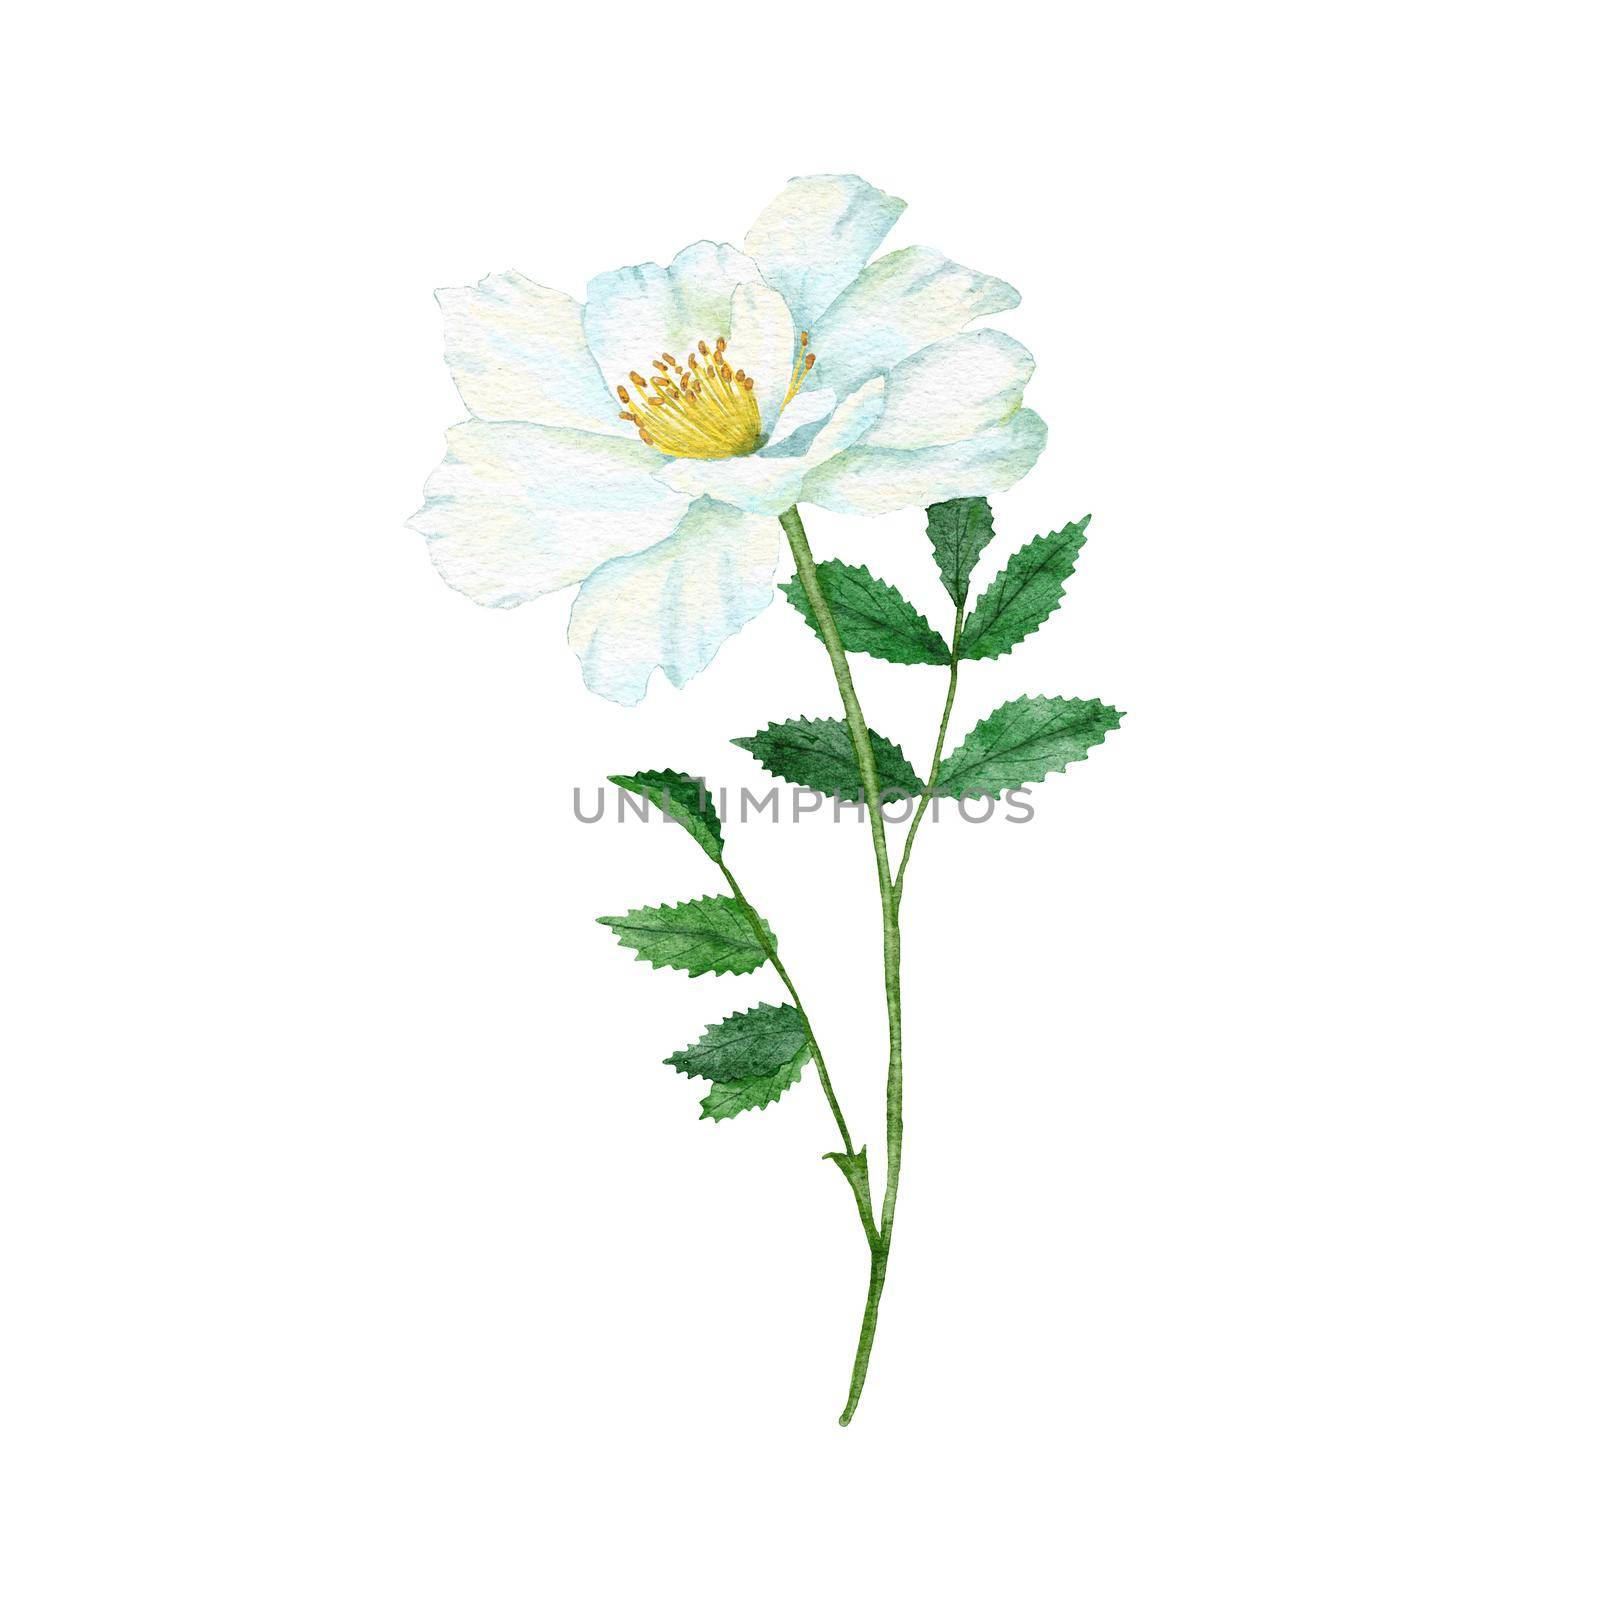 Watercolor hand drawn illustration of white wild rose with green leaf leaves, elegant dog-rose floral flower blossom petals, natural plant greenery. Nature herb, pastel wedding concept for print invitations. by Lagmar